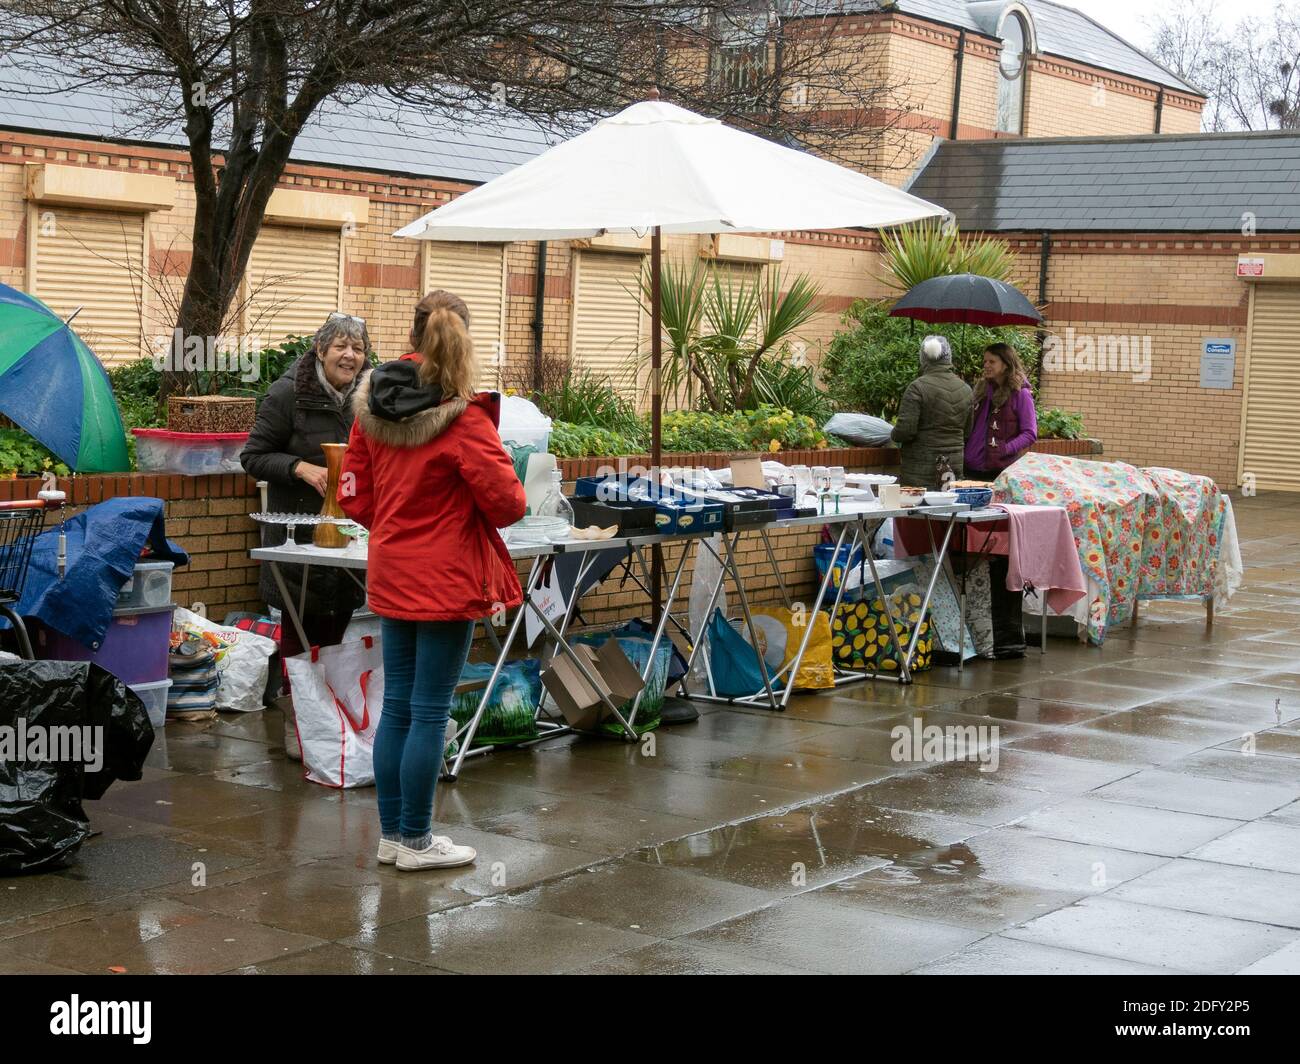 A  Sunday market selling antiques bric a brac and collectables in Saltbrn by the Sea North Yorkshire Stock Photo